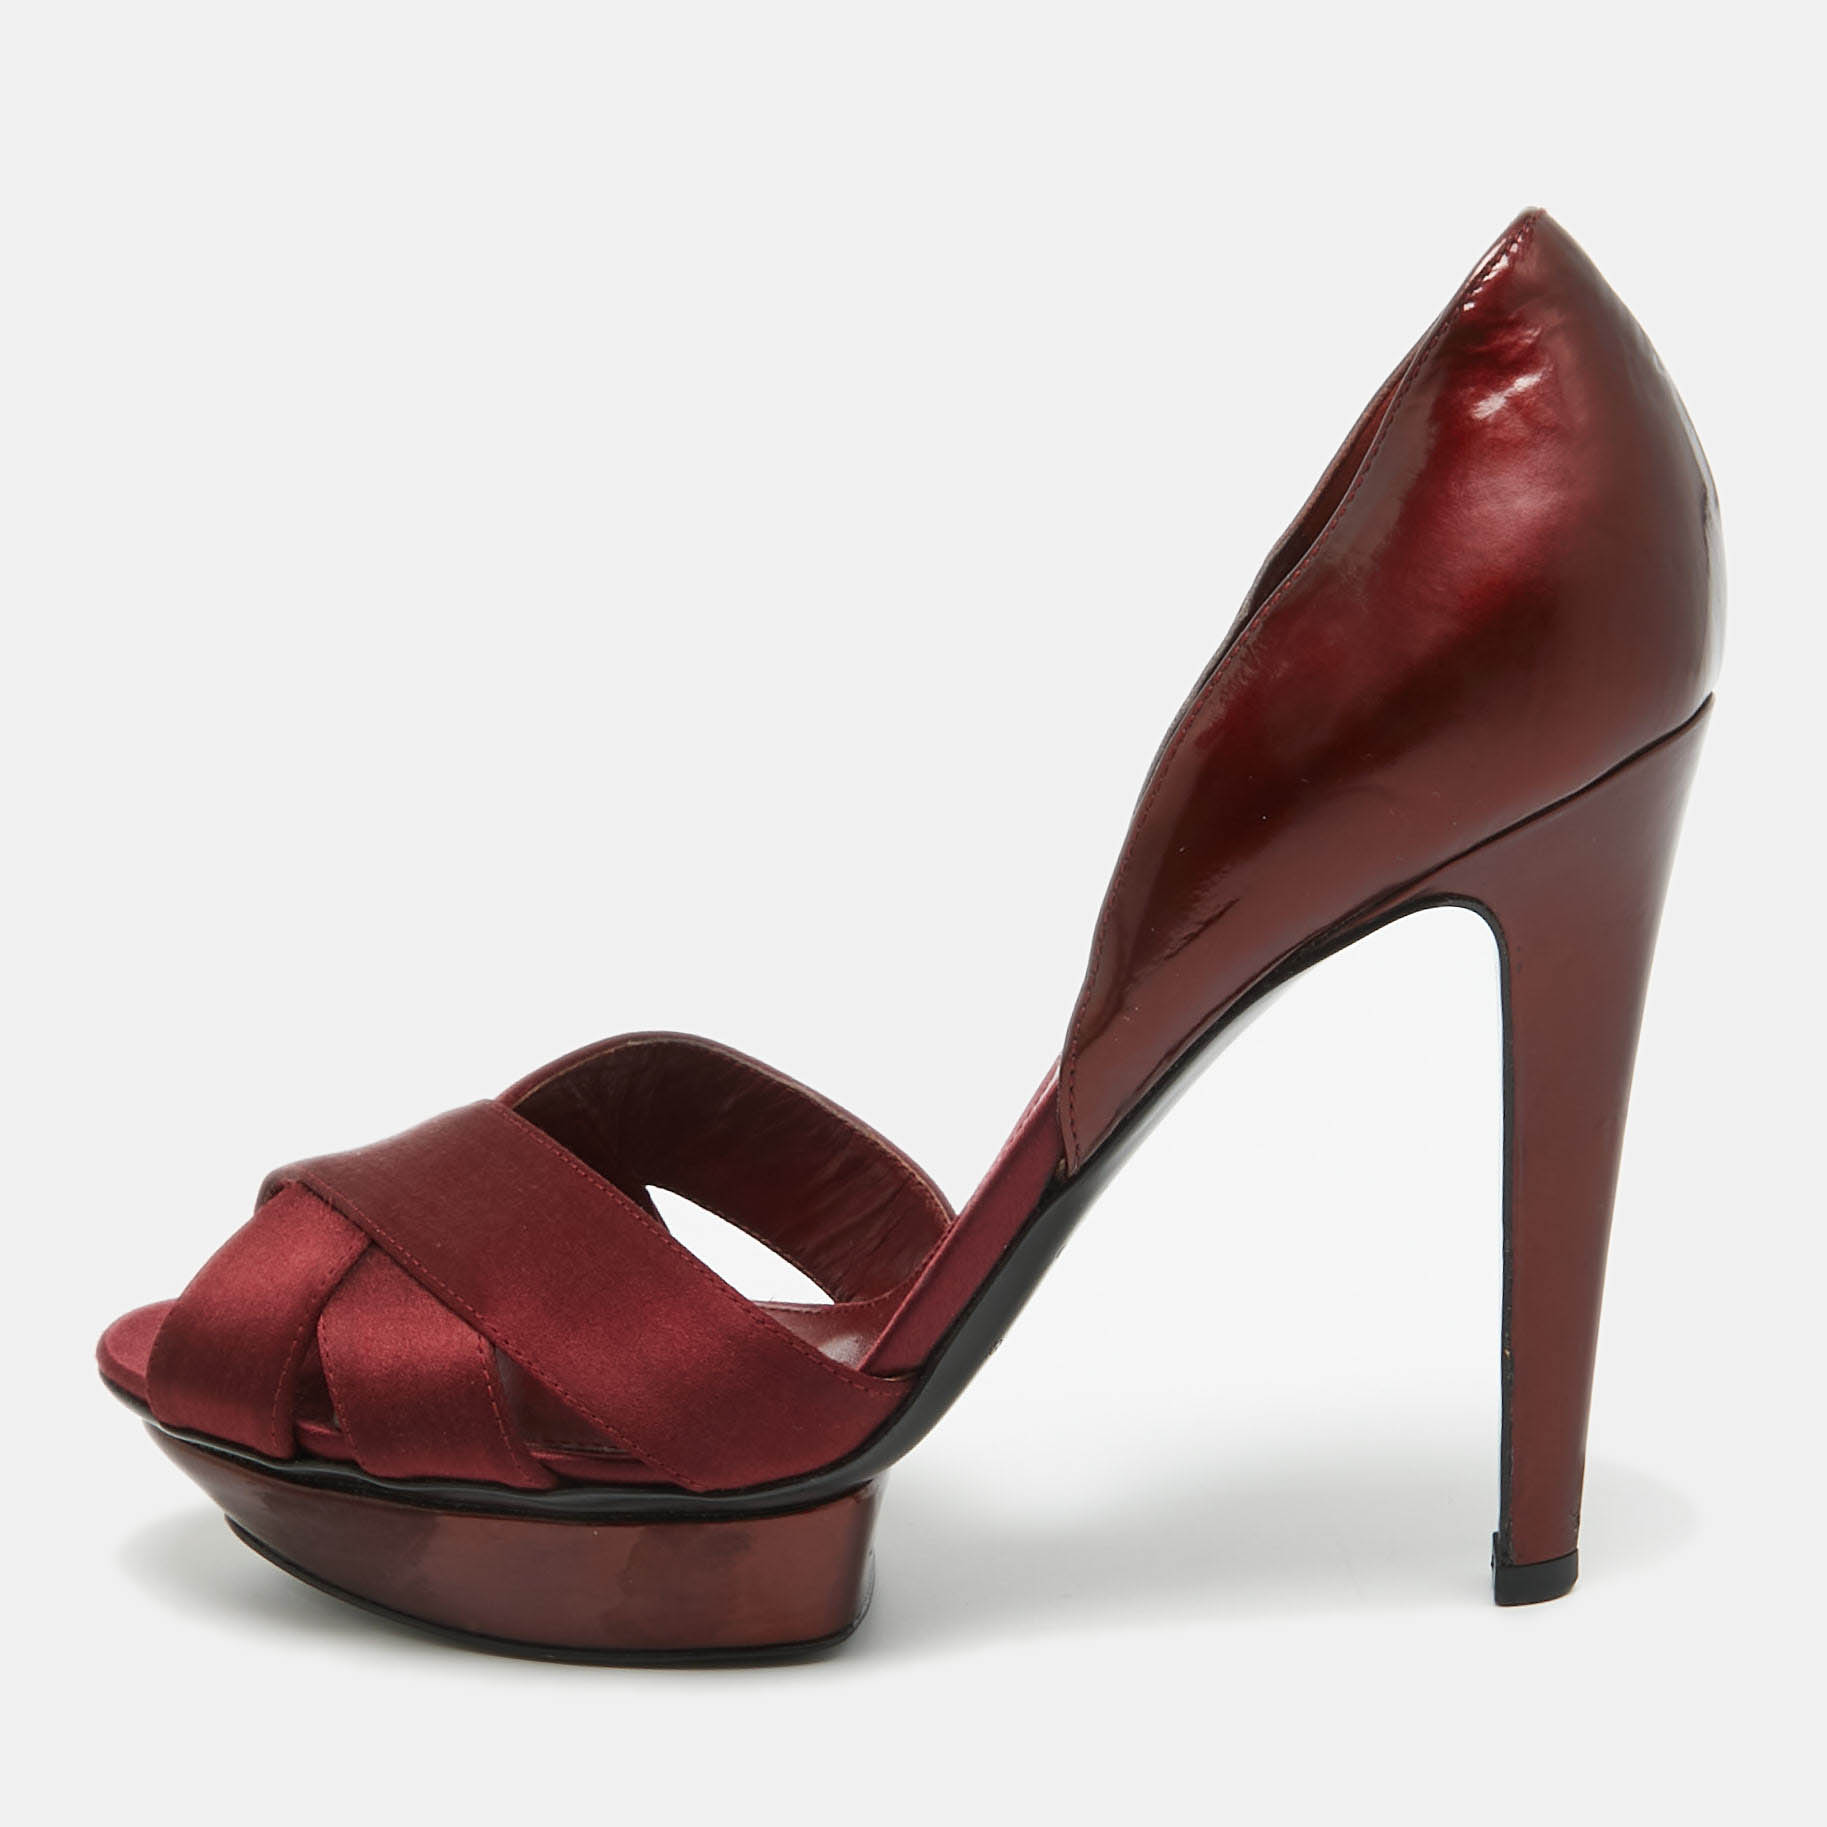 Sergio rossi burgundy satin and patent open toe platform d'orsay pumps size 38